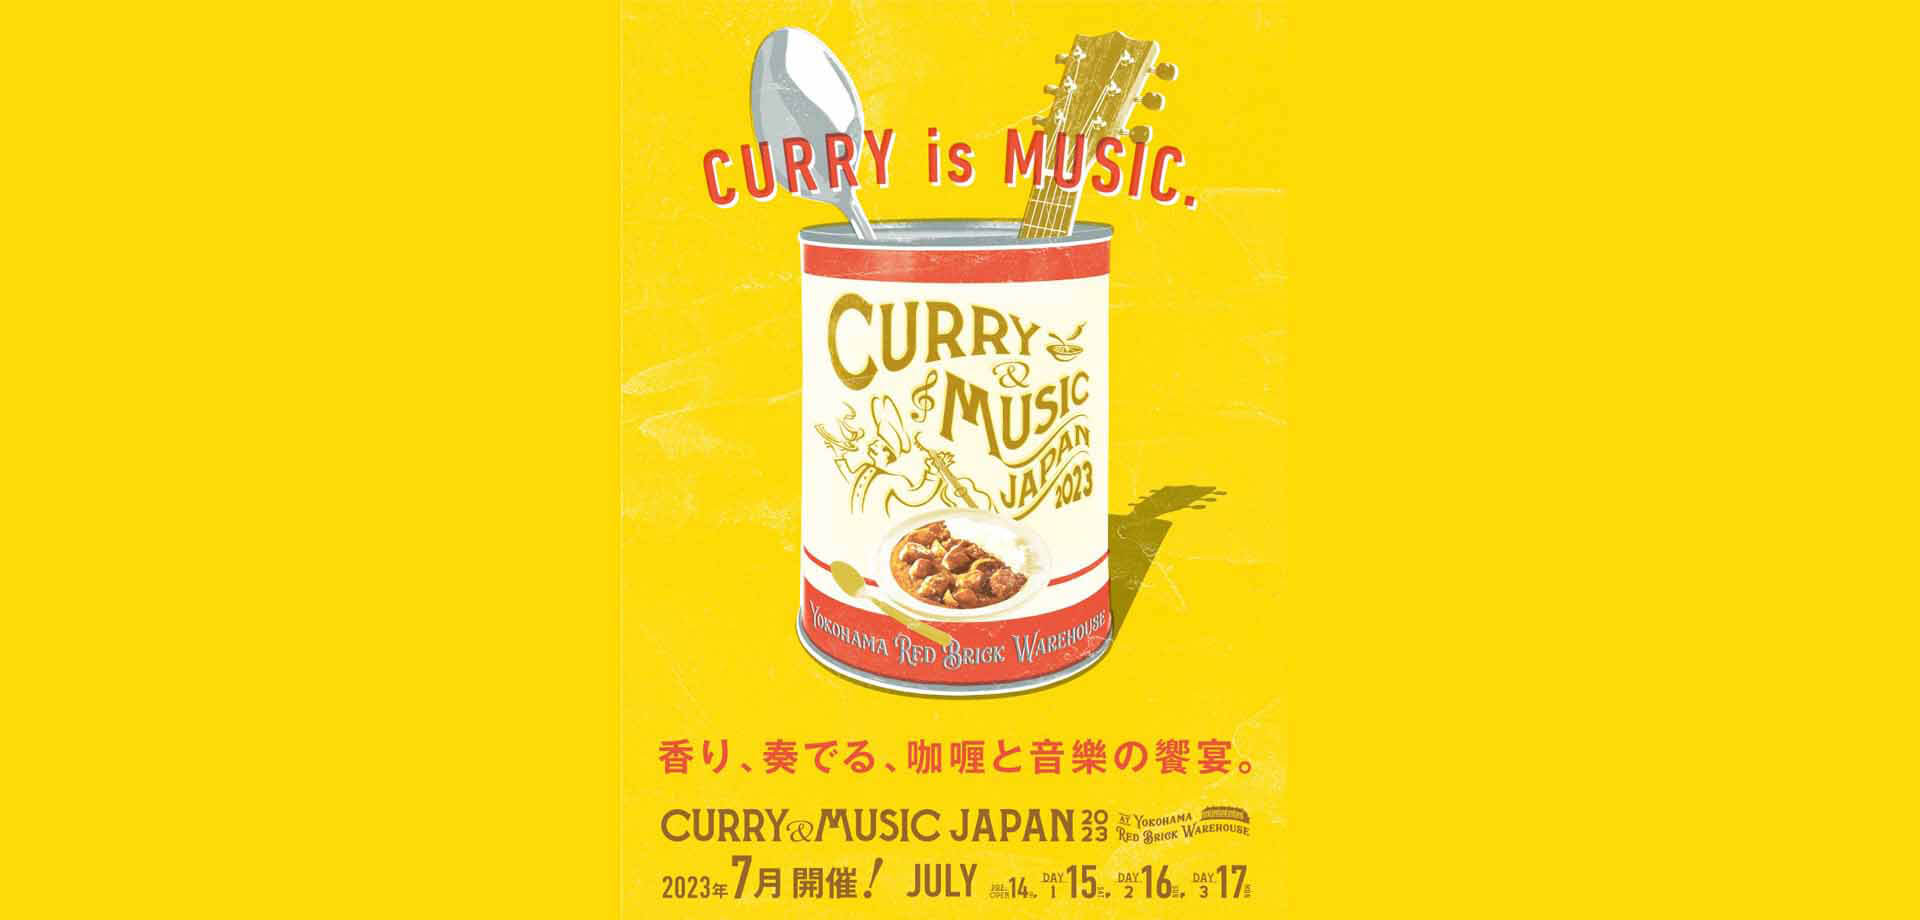 CURRY&MUSIC JAPAN 2023 横浜赤レンガ倉庫 カレーフェス